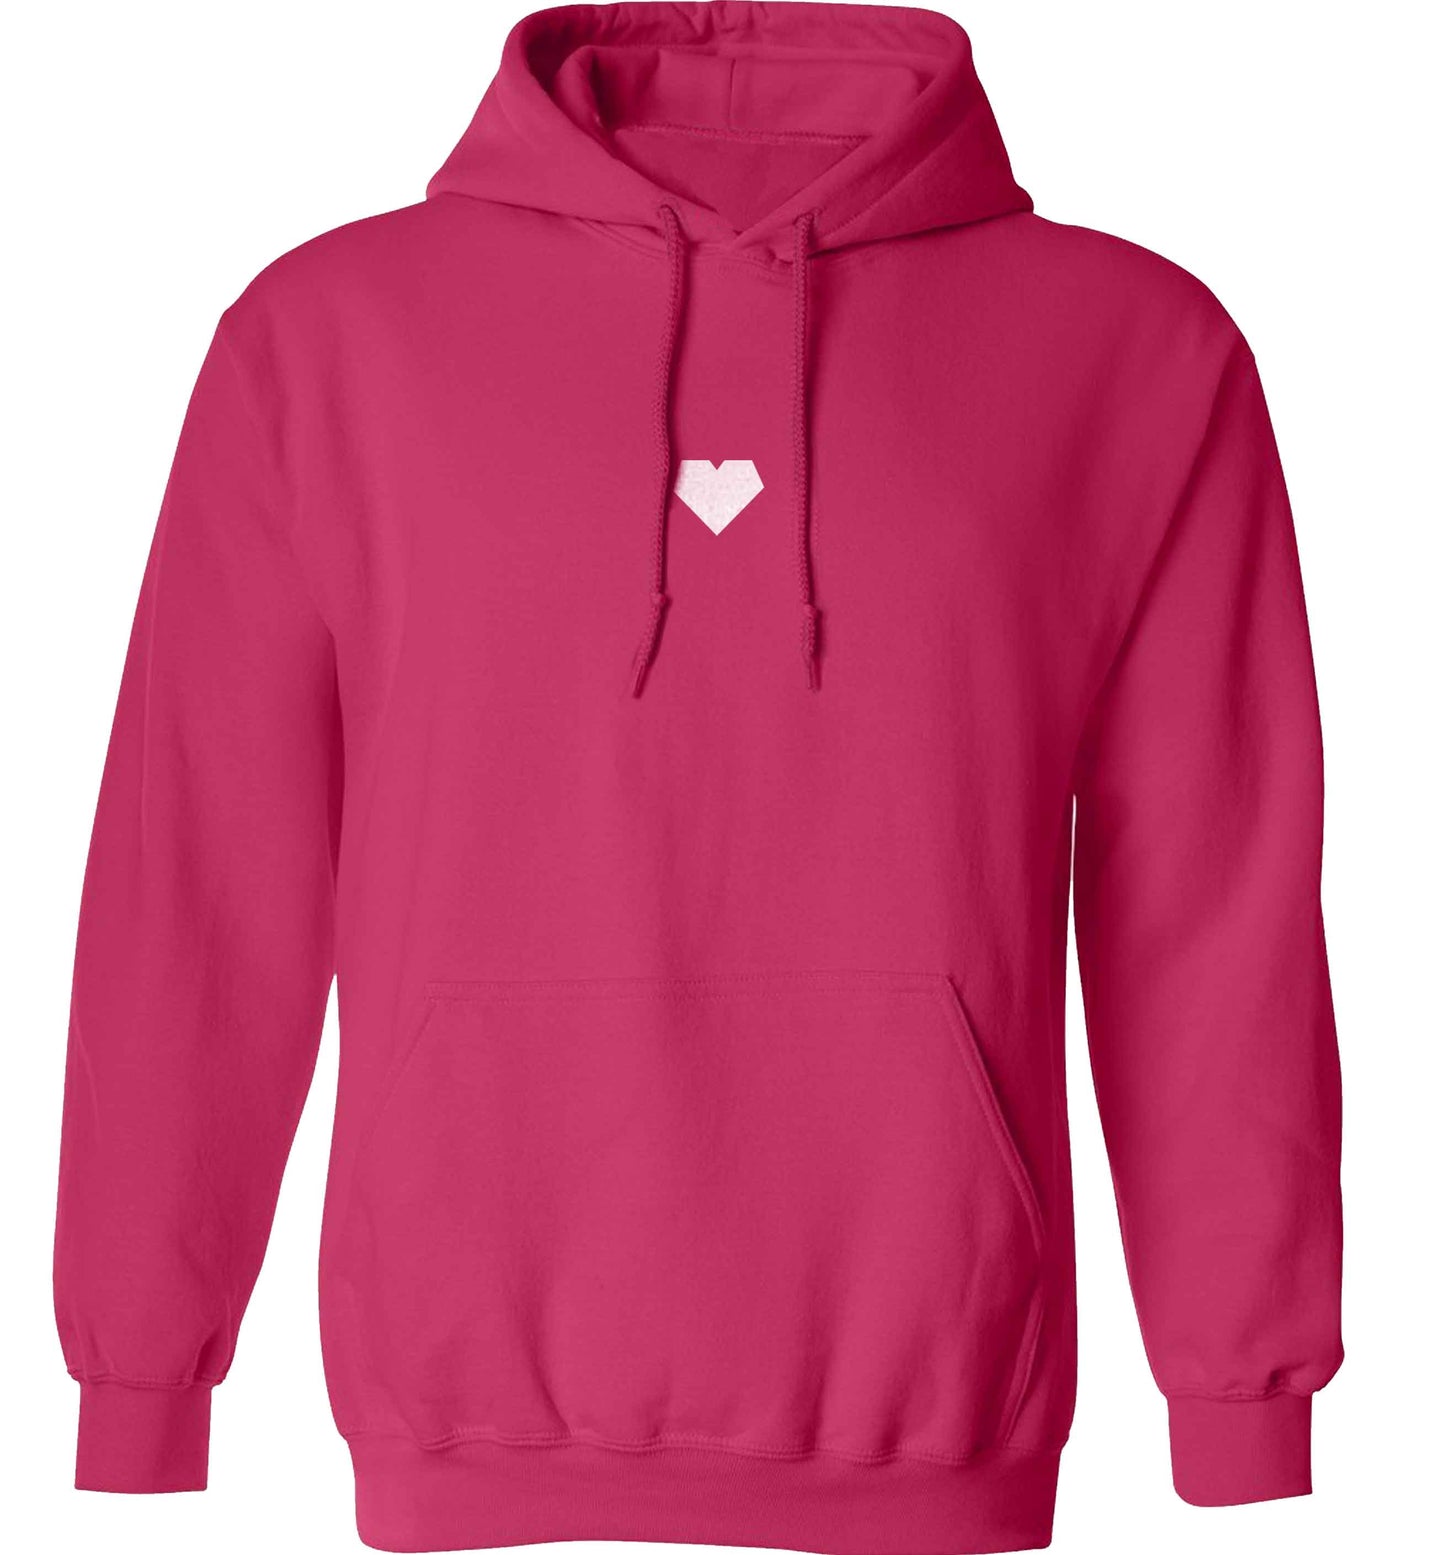 Tiny heart adults unisex pink hoodie 2XL